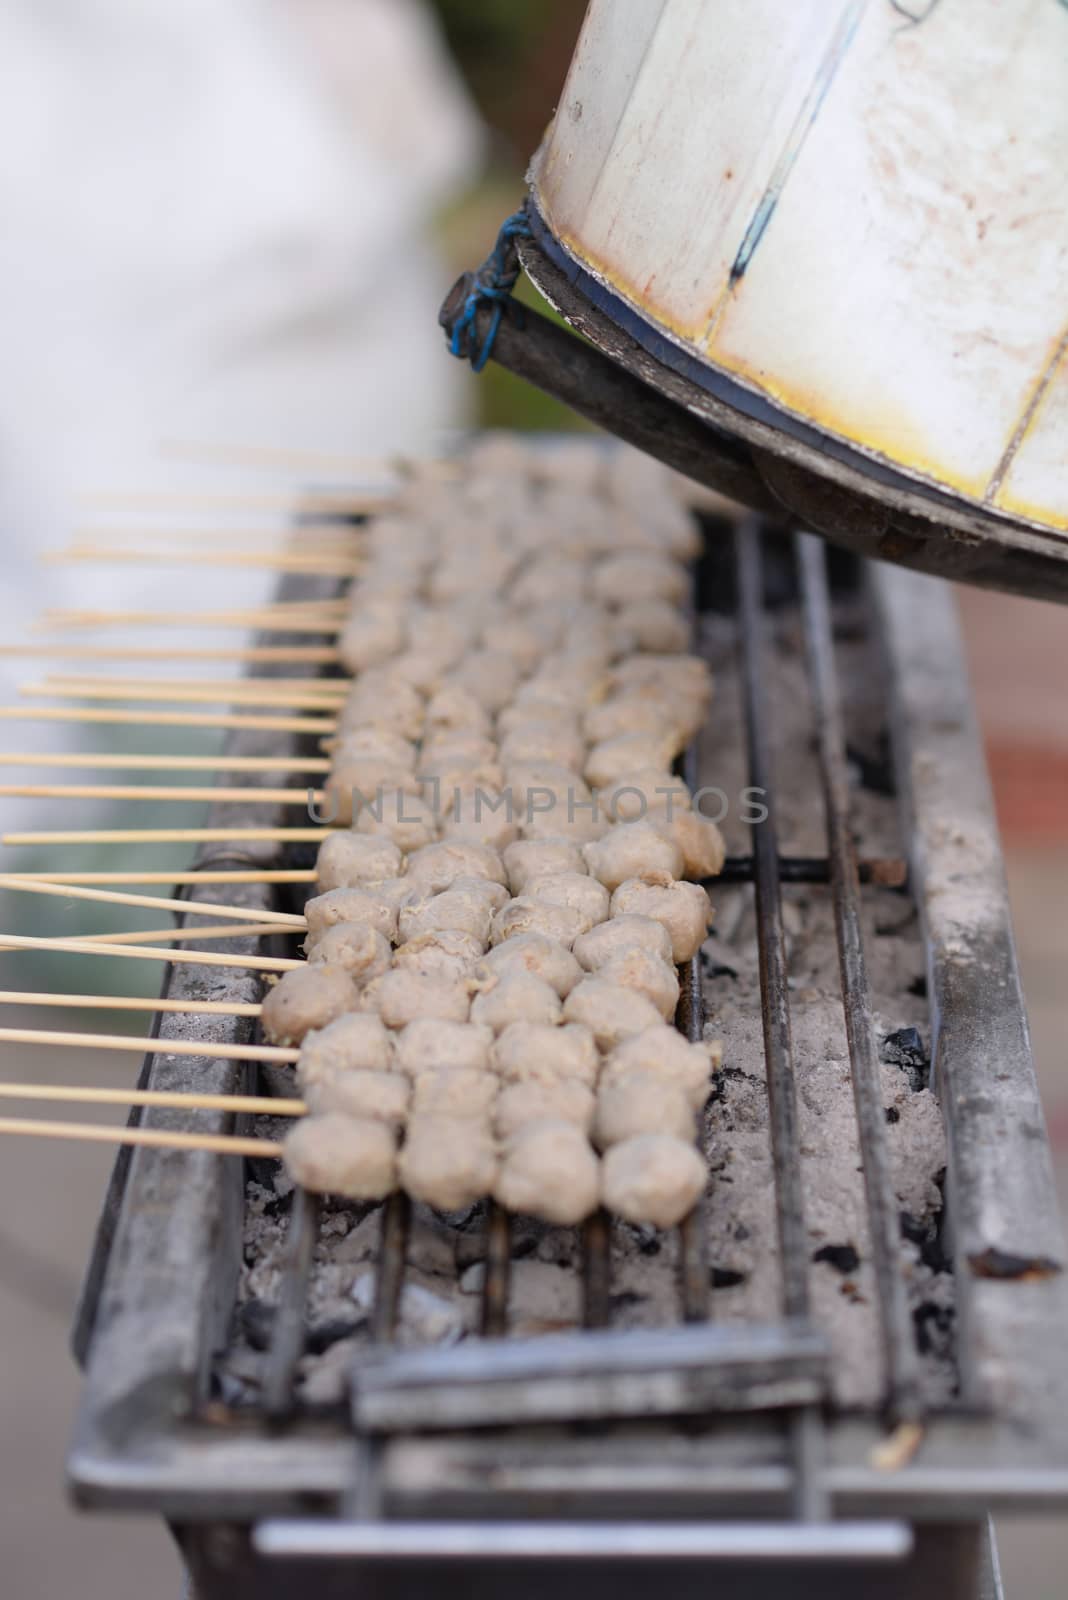 Meatballs are made of pork skewers grilled on a charcoal grill. With an exhaust fan